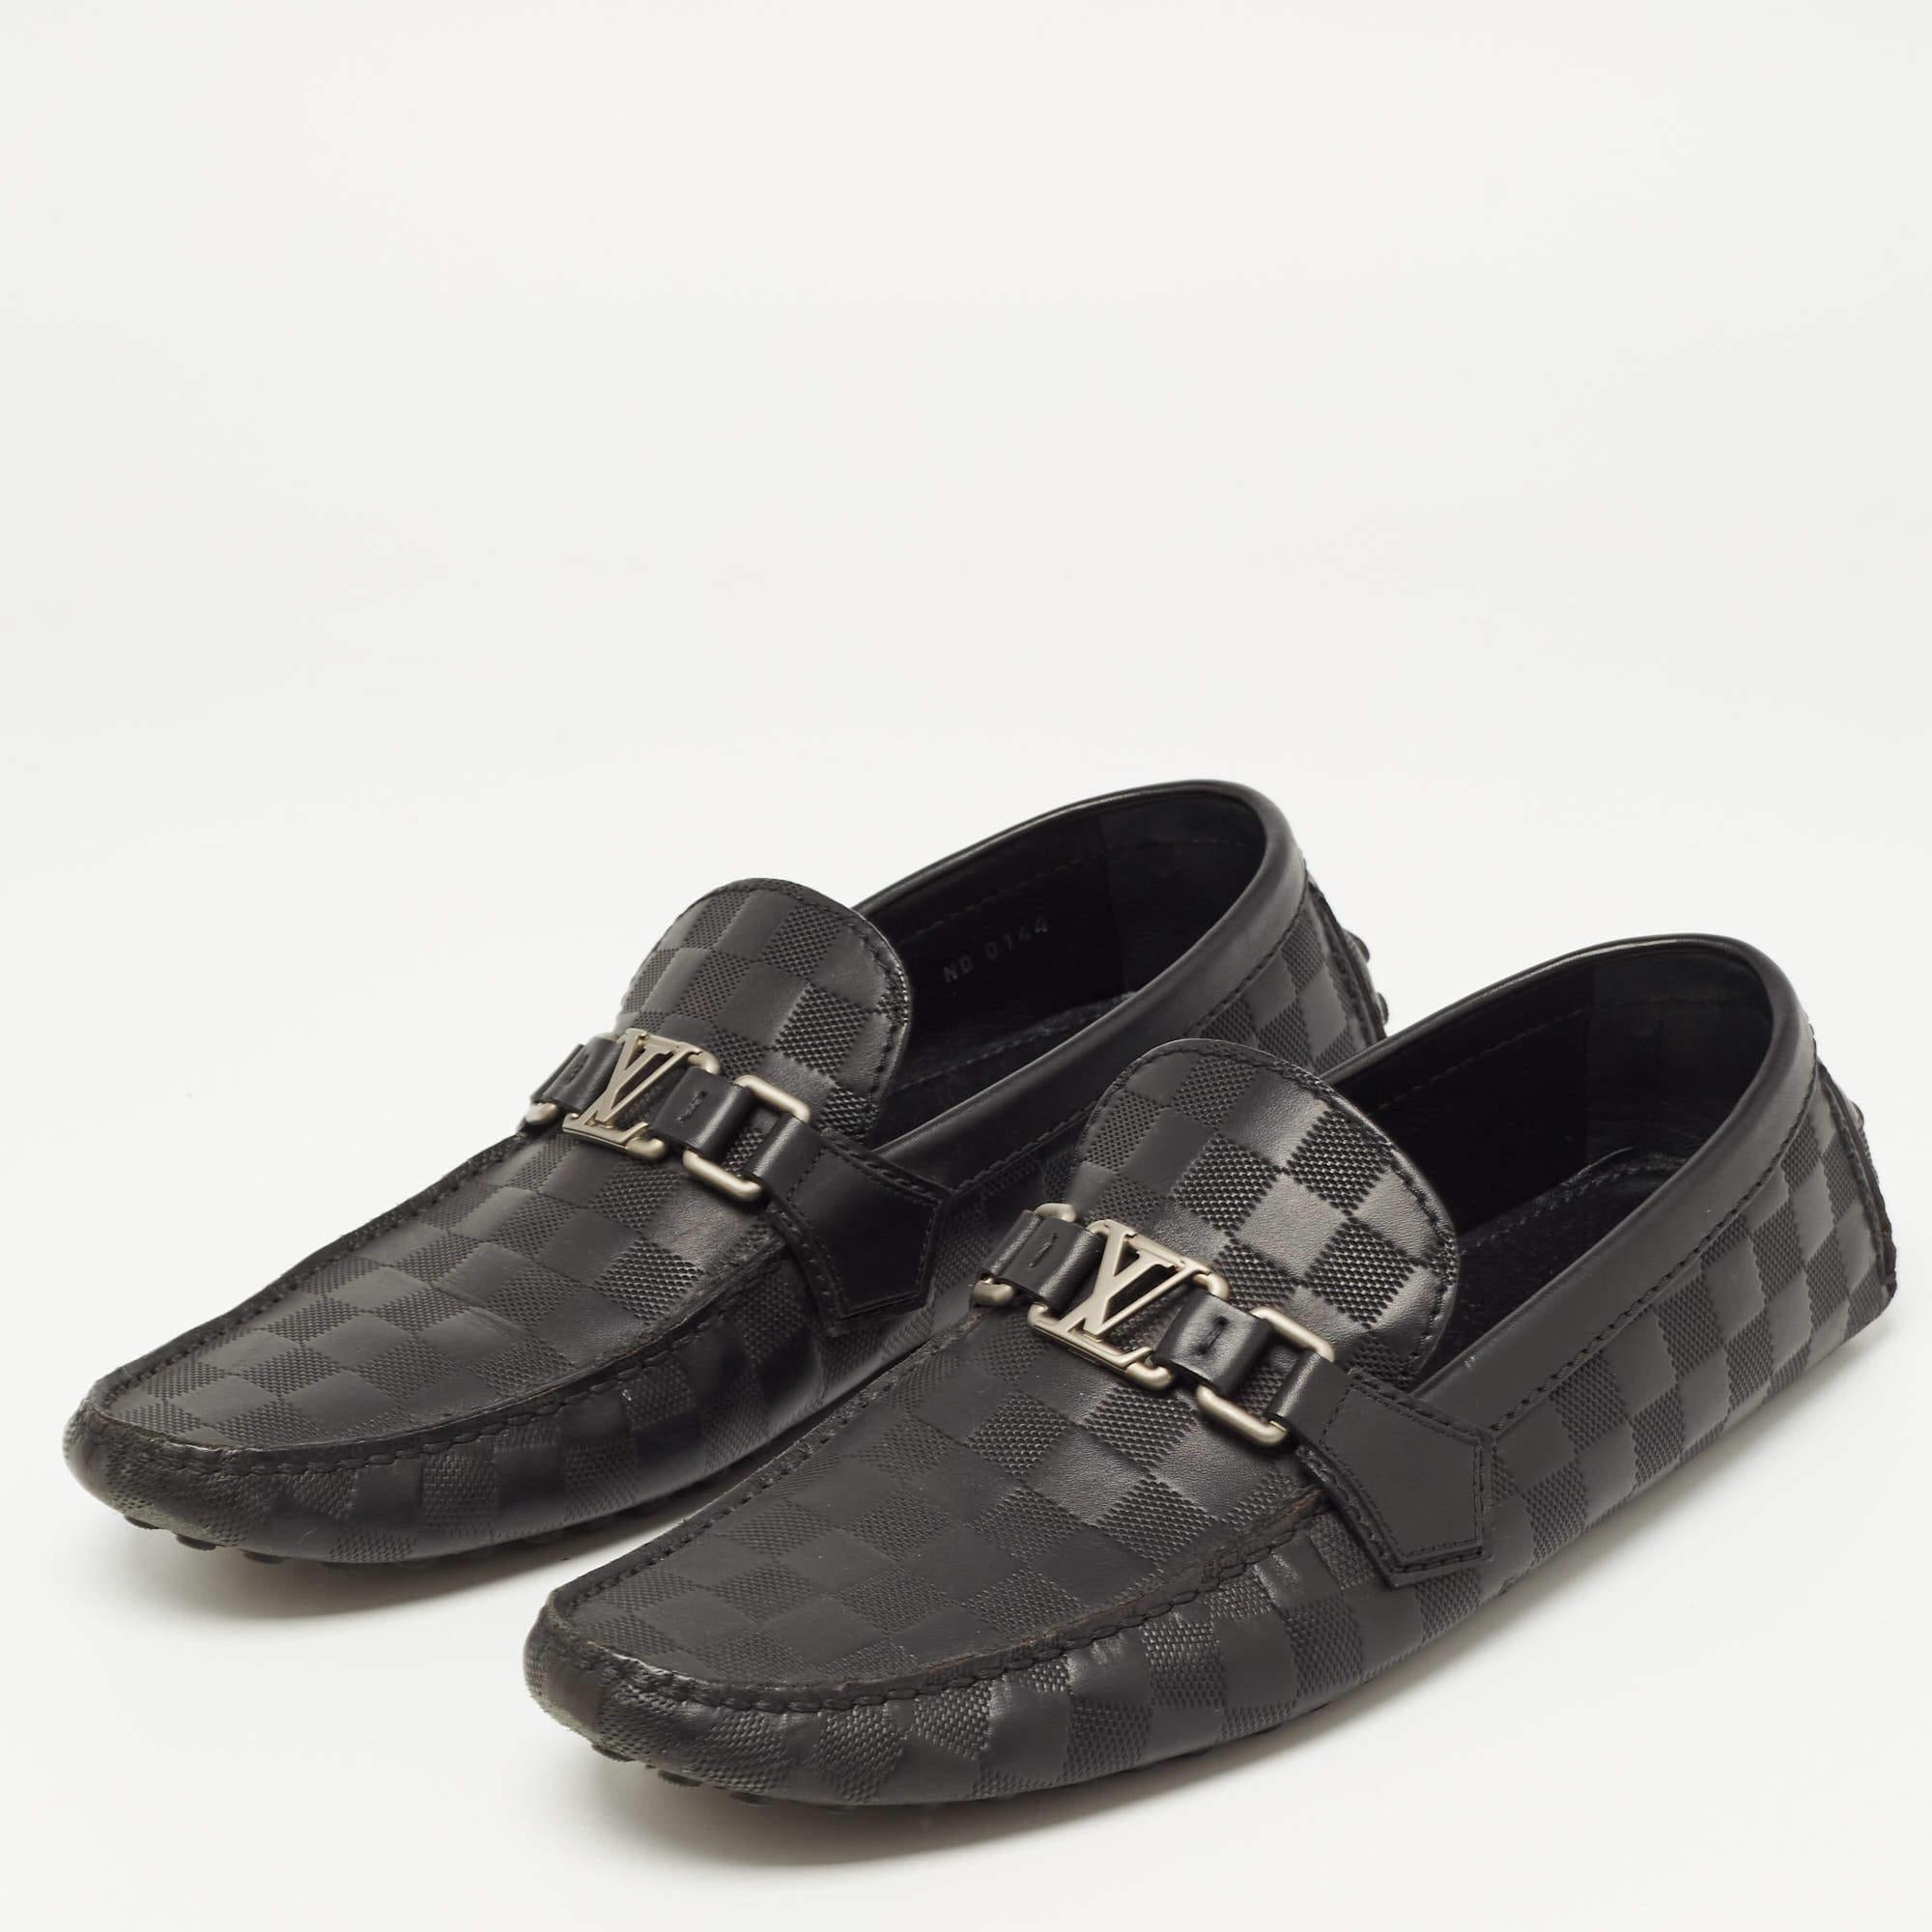 Louis Vuitton Black Damier Embossed Leather Hockenheim Loafers Size 43 4